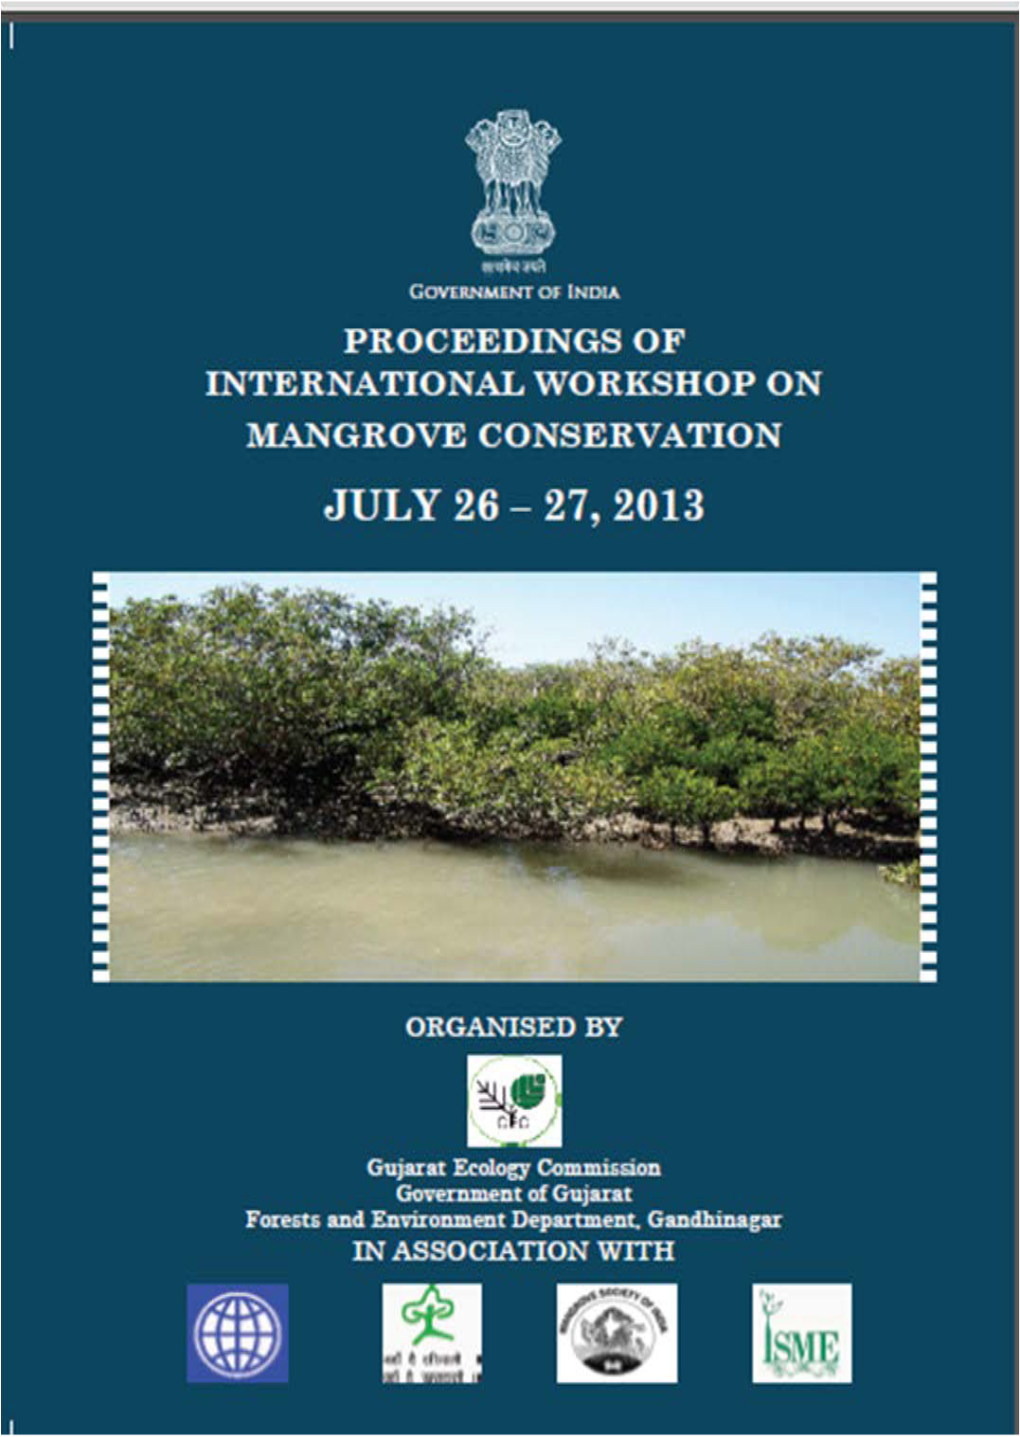 Mangrove Conservation in India 2013